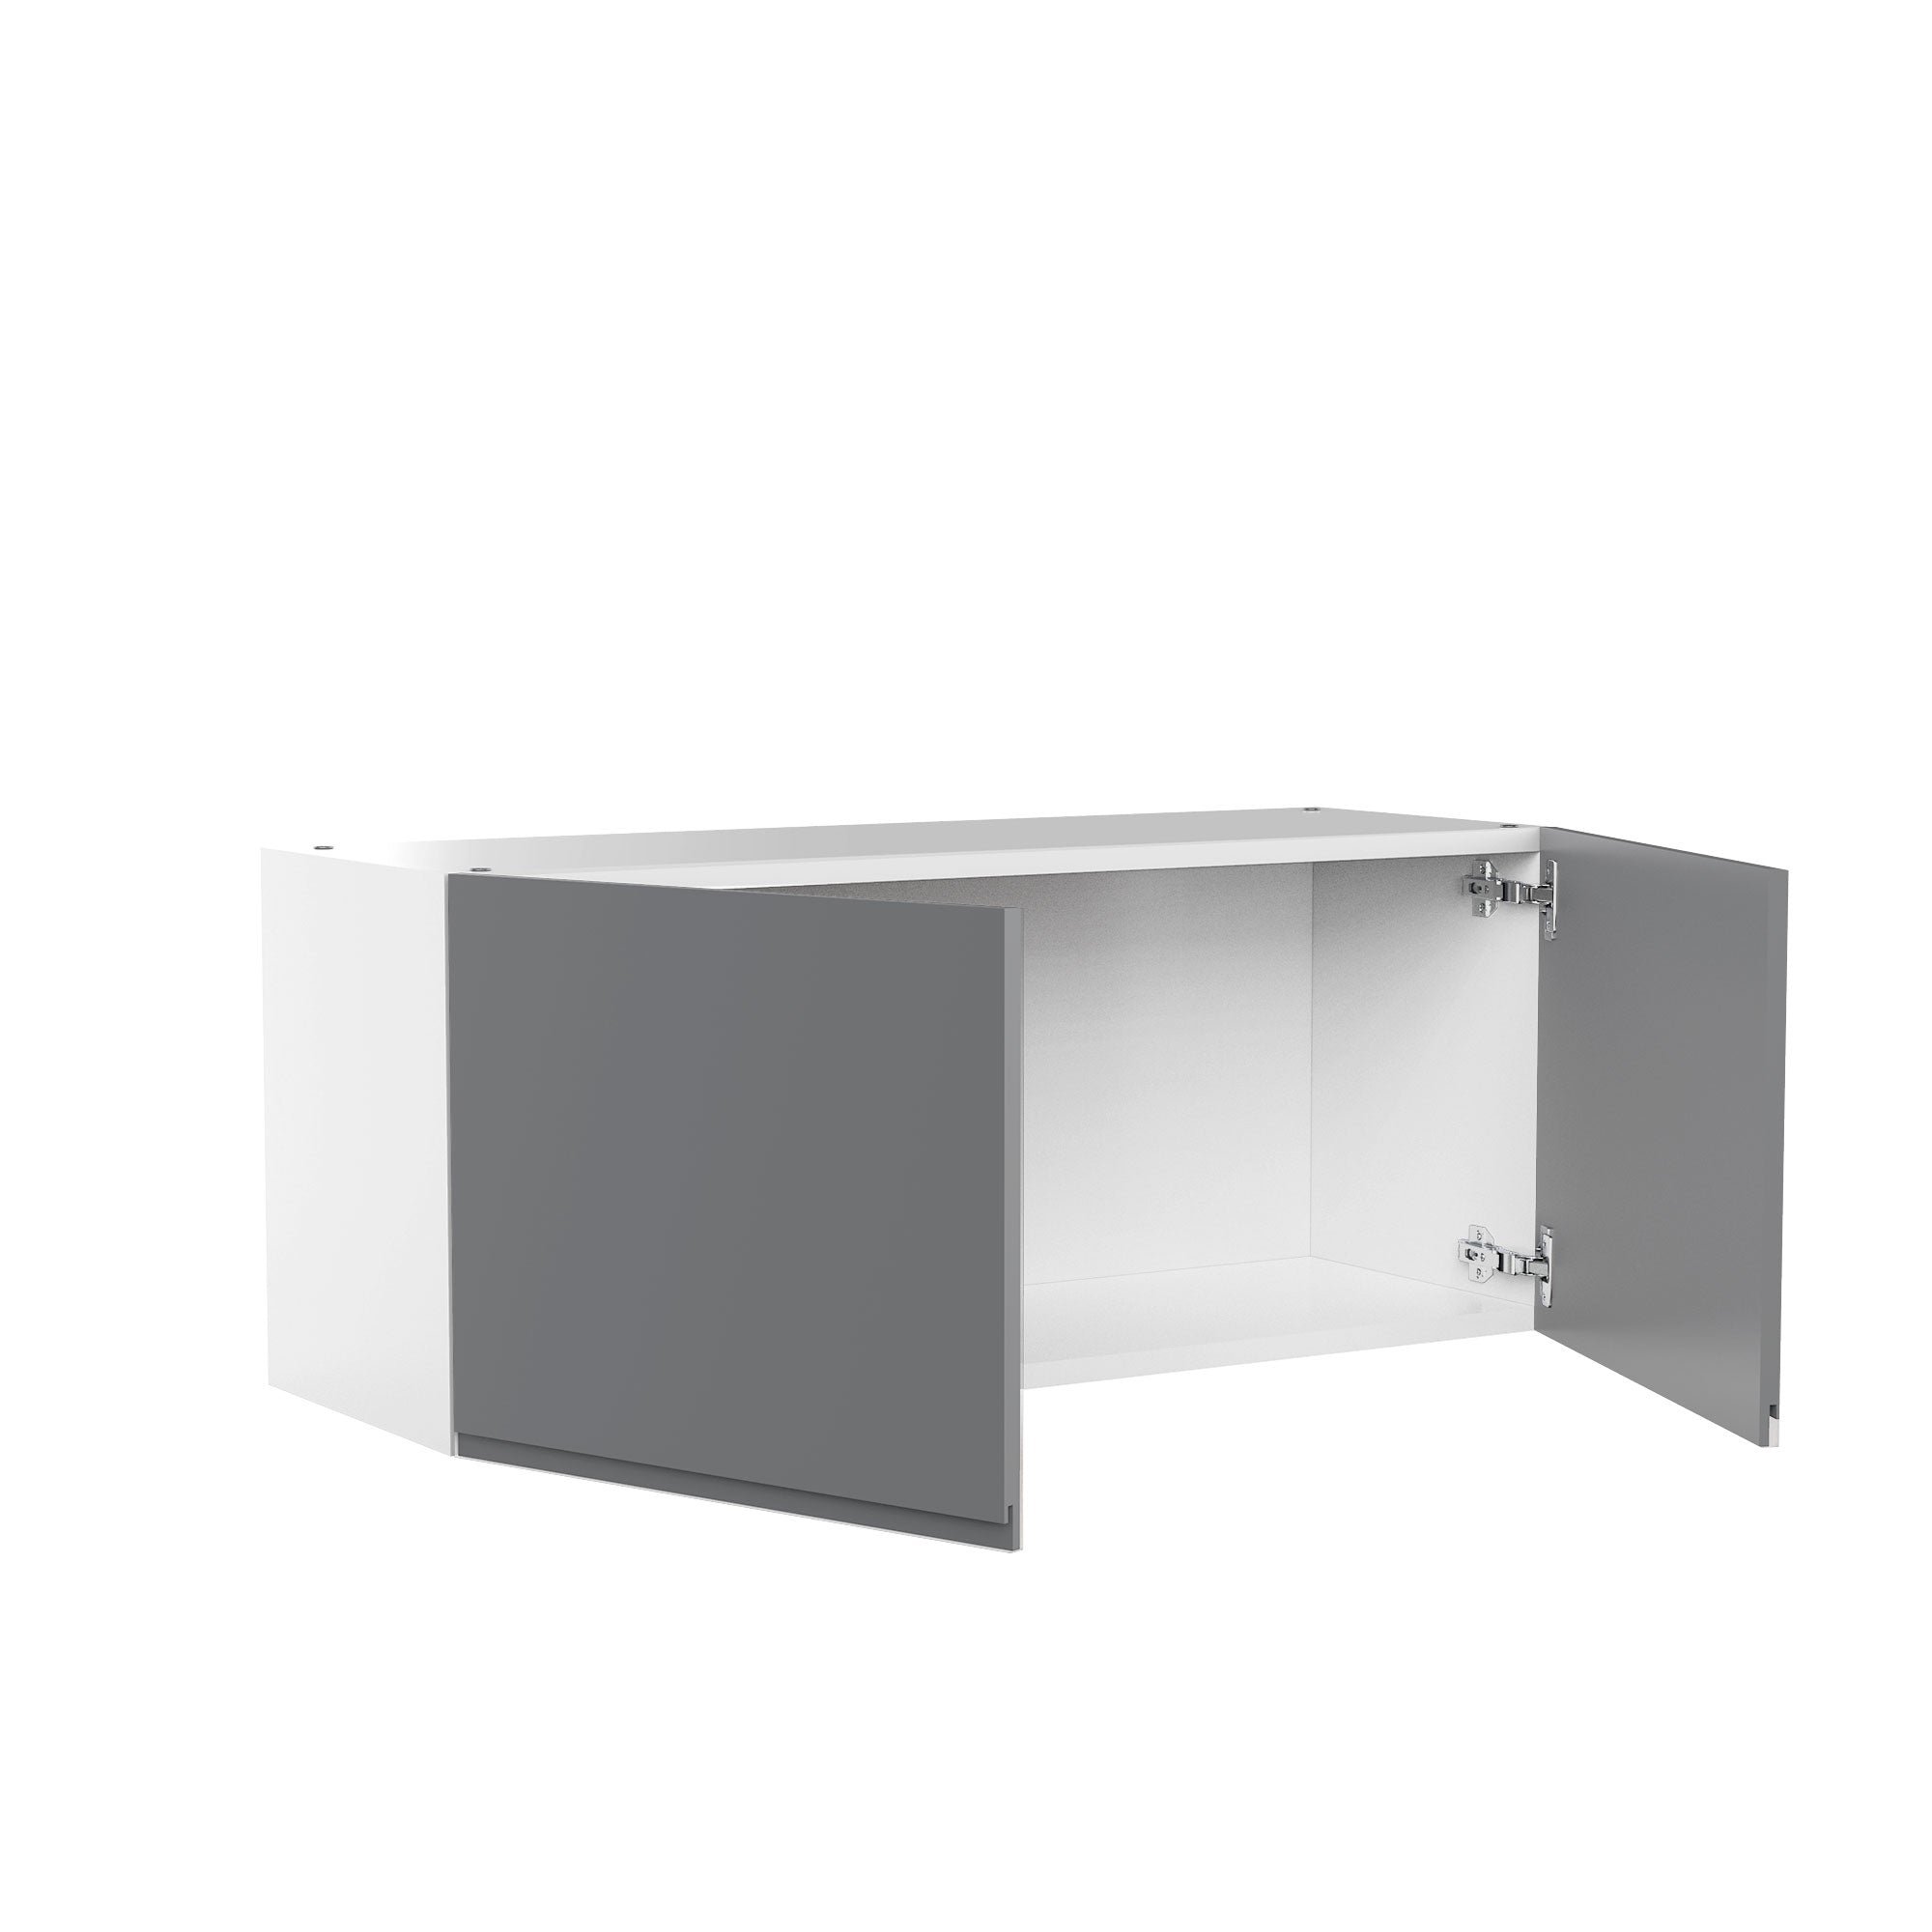 RTA - Lacquer Grey - Double Door Wall Cabinets | 36"W x 15"H x 12"D